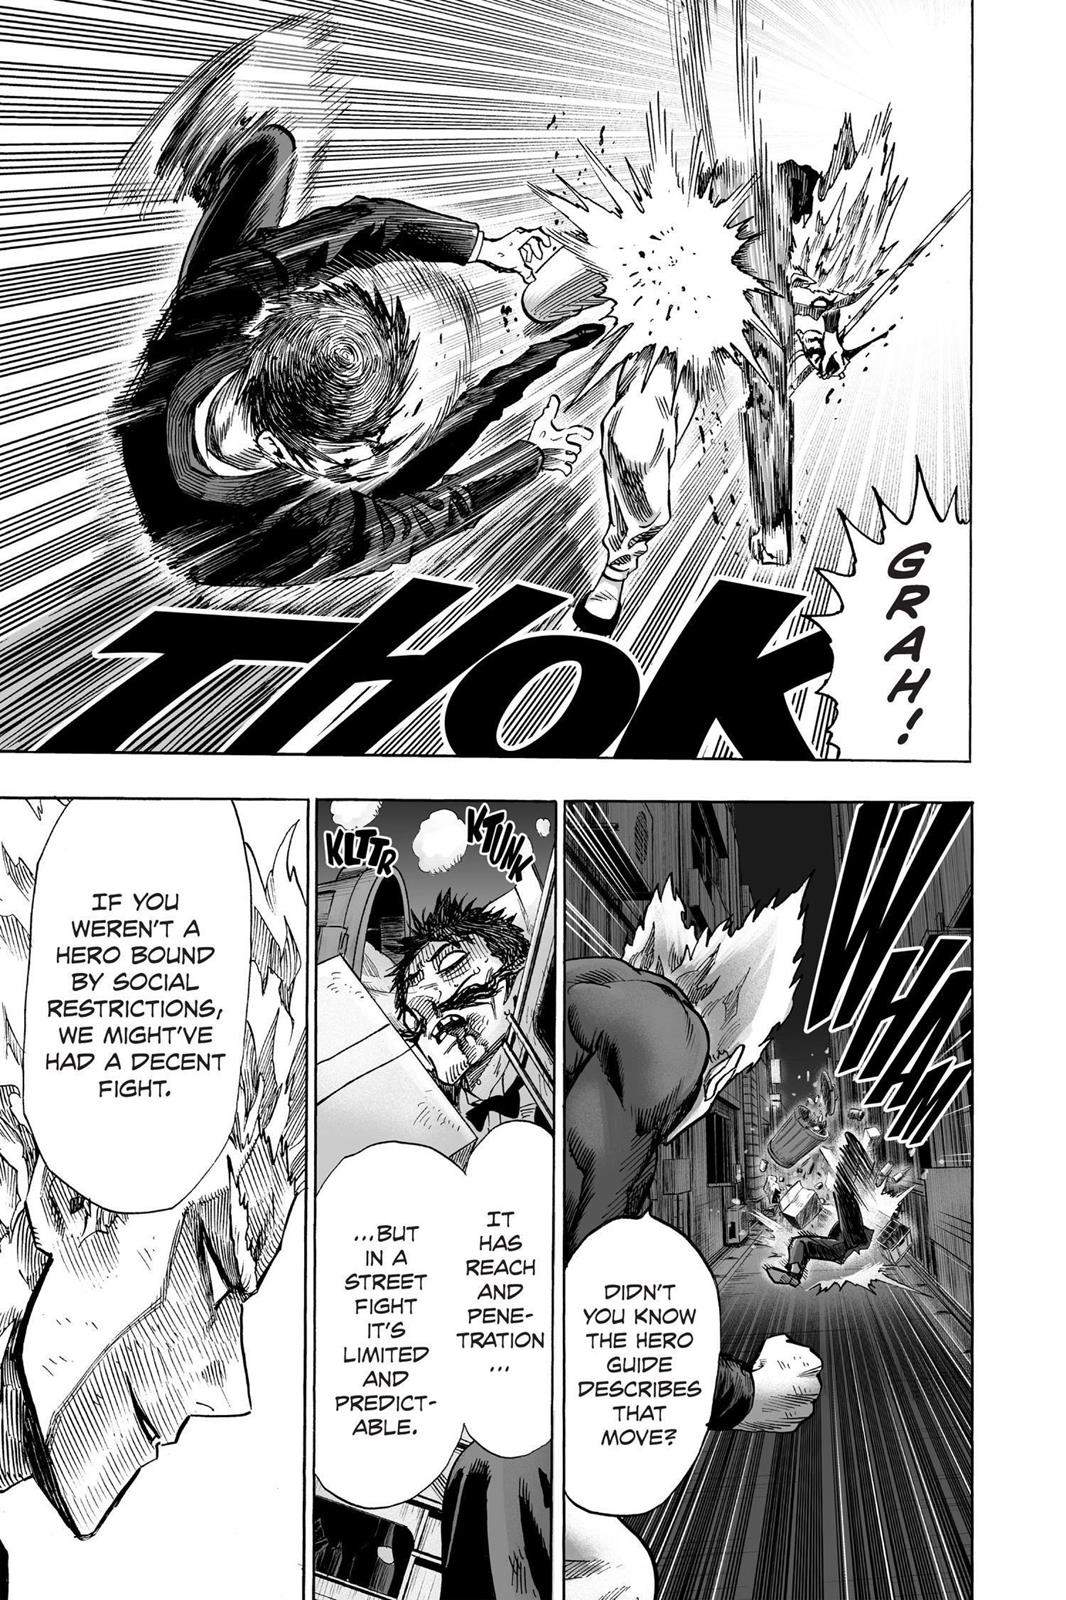 One-Punch Man, Punch 50 image 22